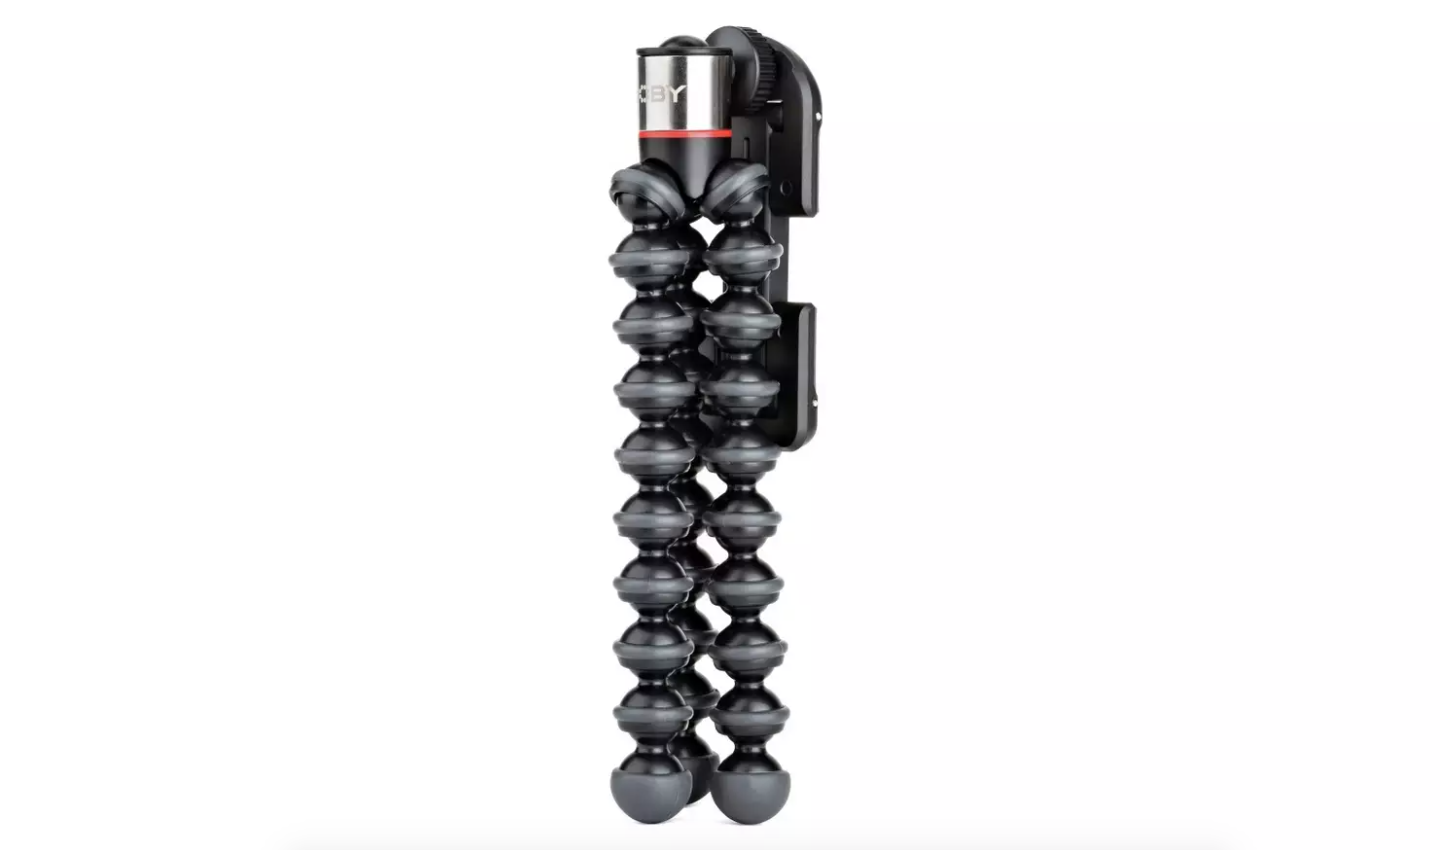 Product Image of Joby GripTight ONE GP Tripod Stand with Phone Holder - Black